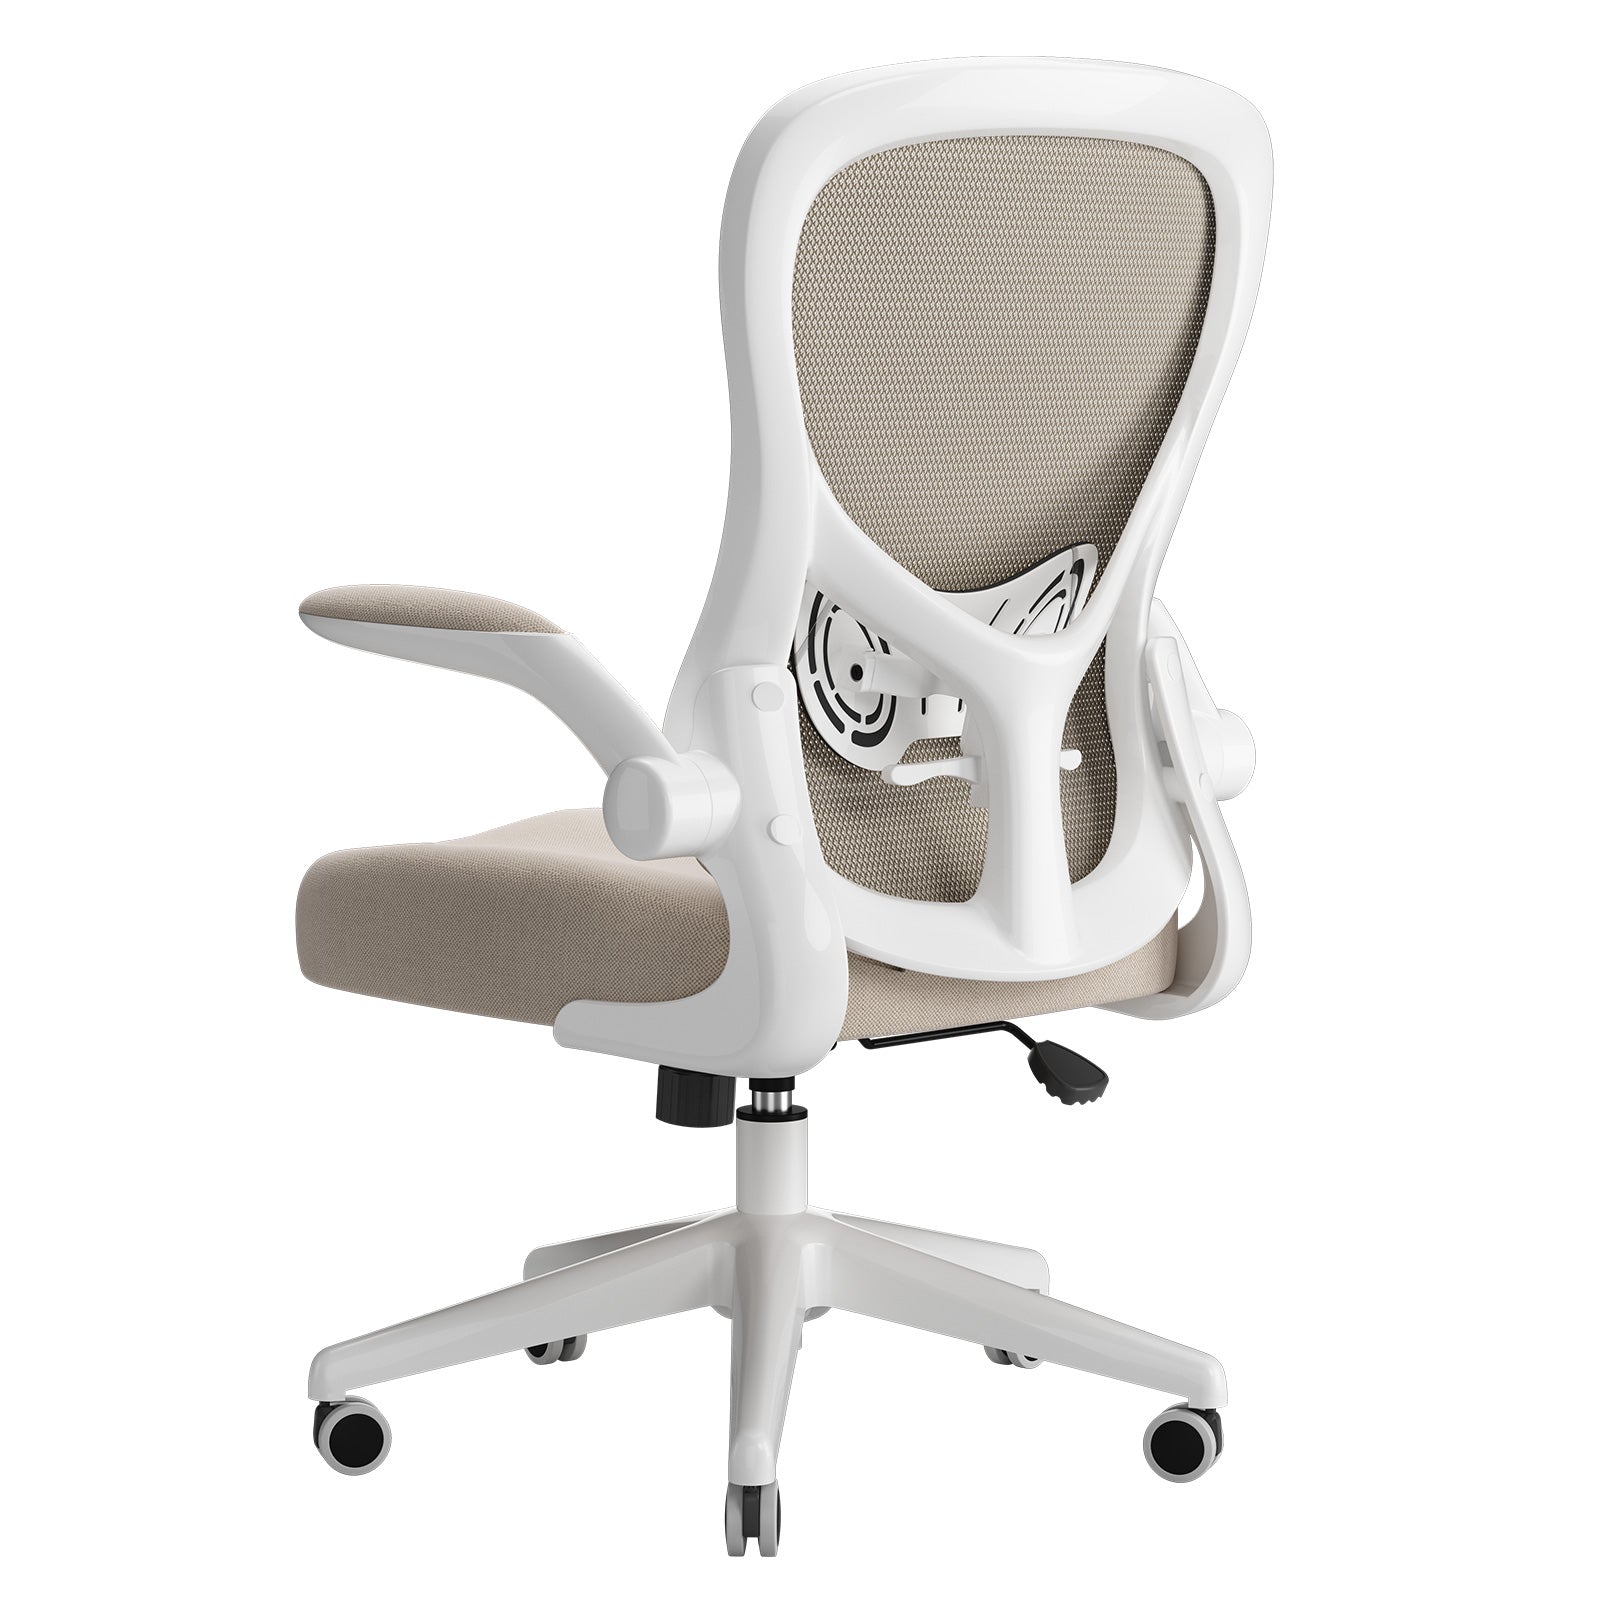 HBADA Butterfly Office Chair, Gray Color